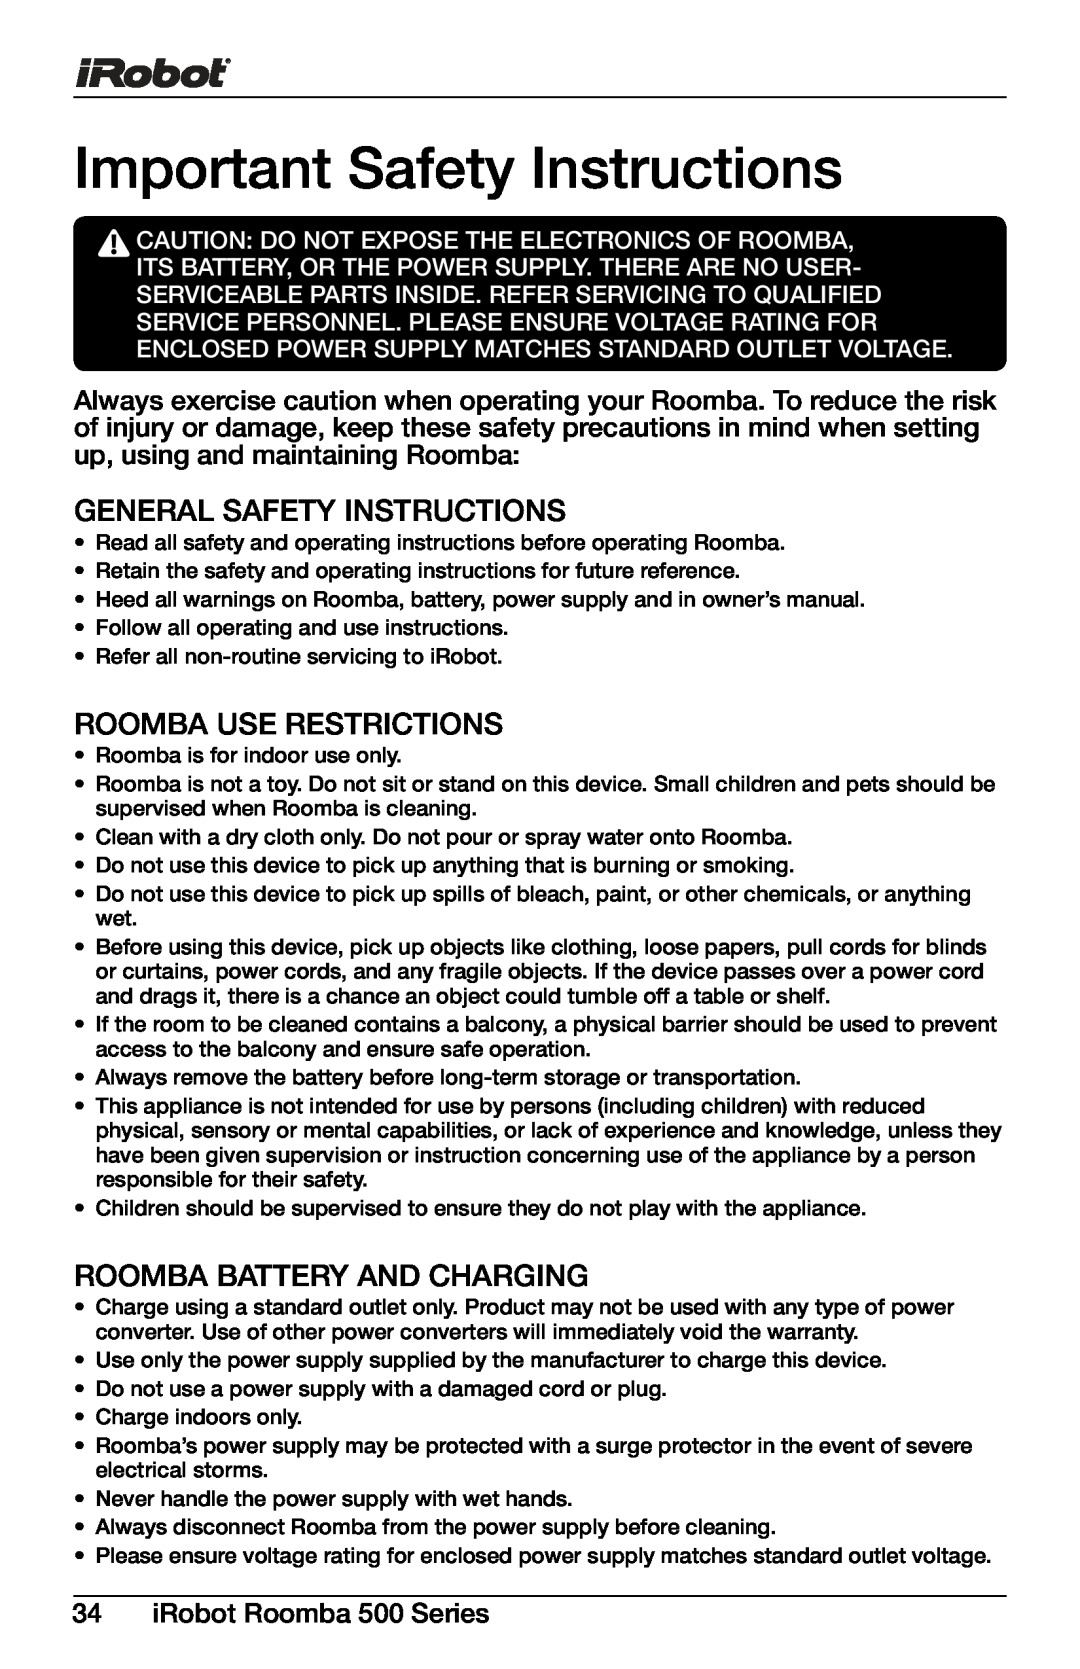 iRobot 600 Series, 611, 571, 560, 540, 563 Important Safety Instructions, General Safety Instructions, Roomba Use Restrictions 